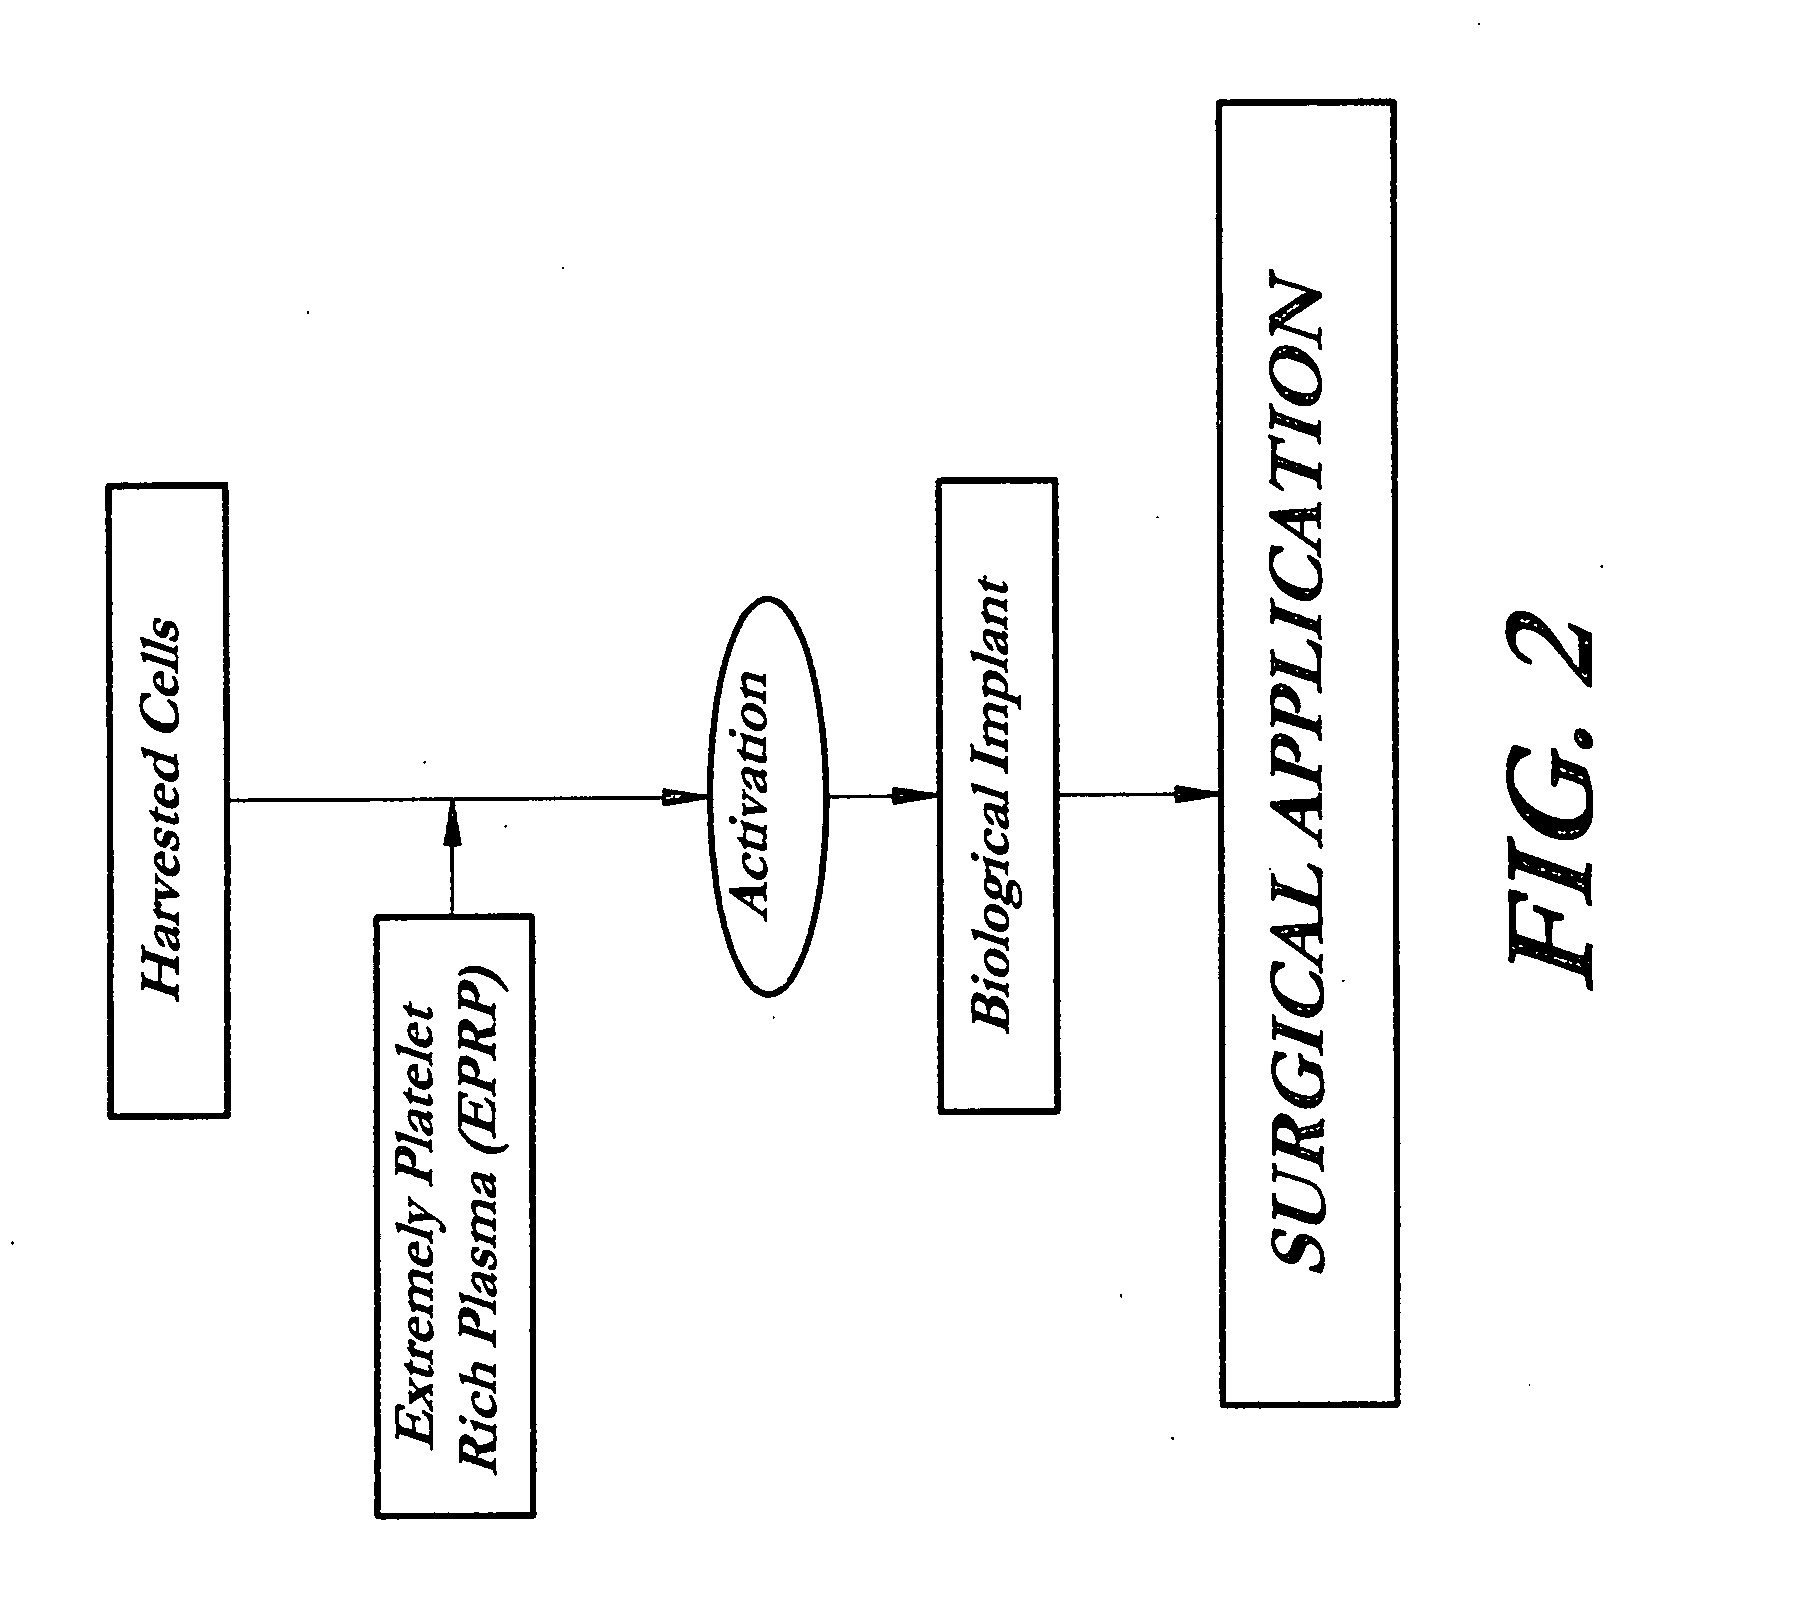 Composition and procedure for tissue creation, regeneration and repair by a cell-bearing biological implant enriched with platelet concentrate and supplements